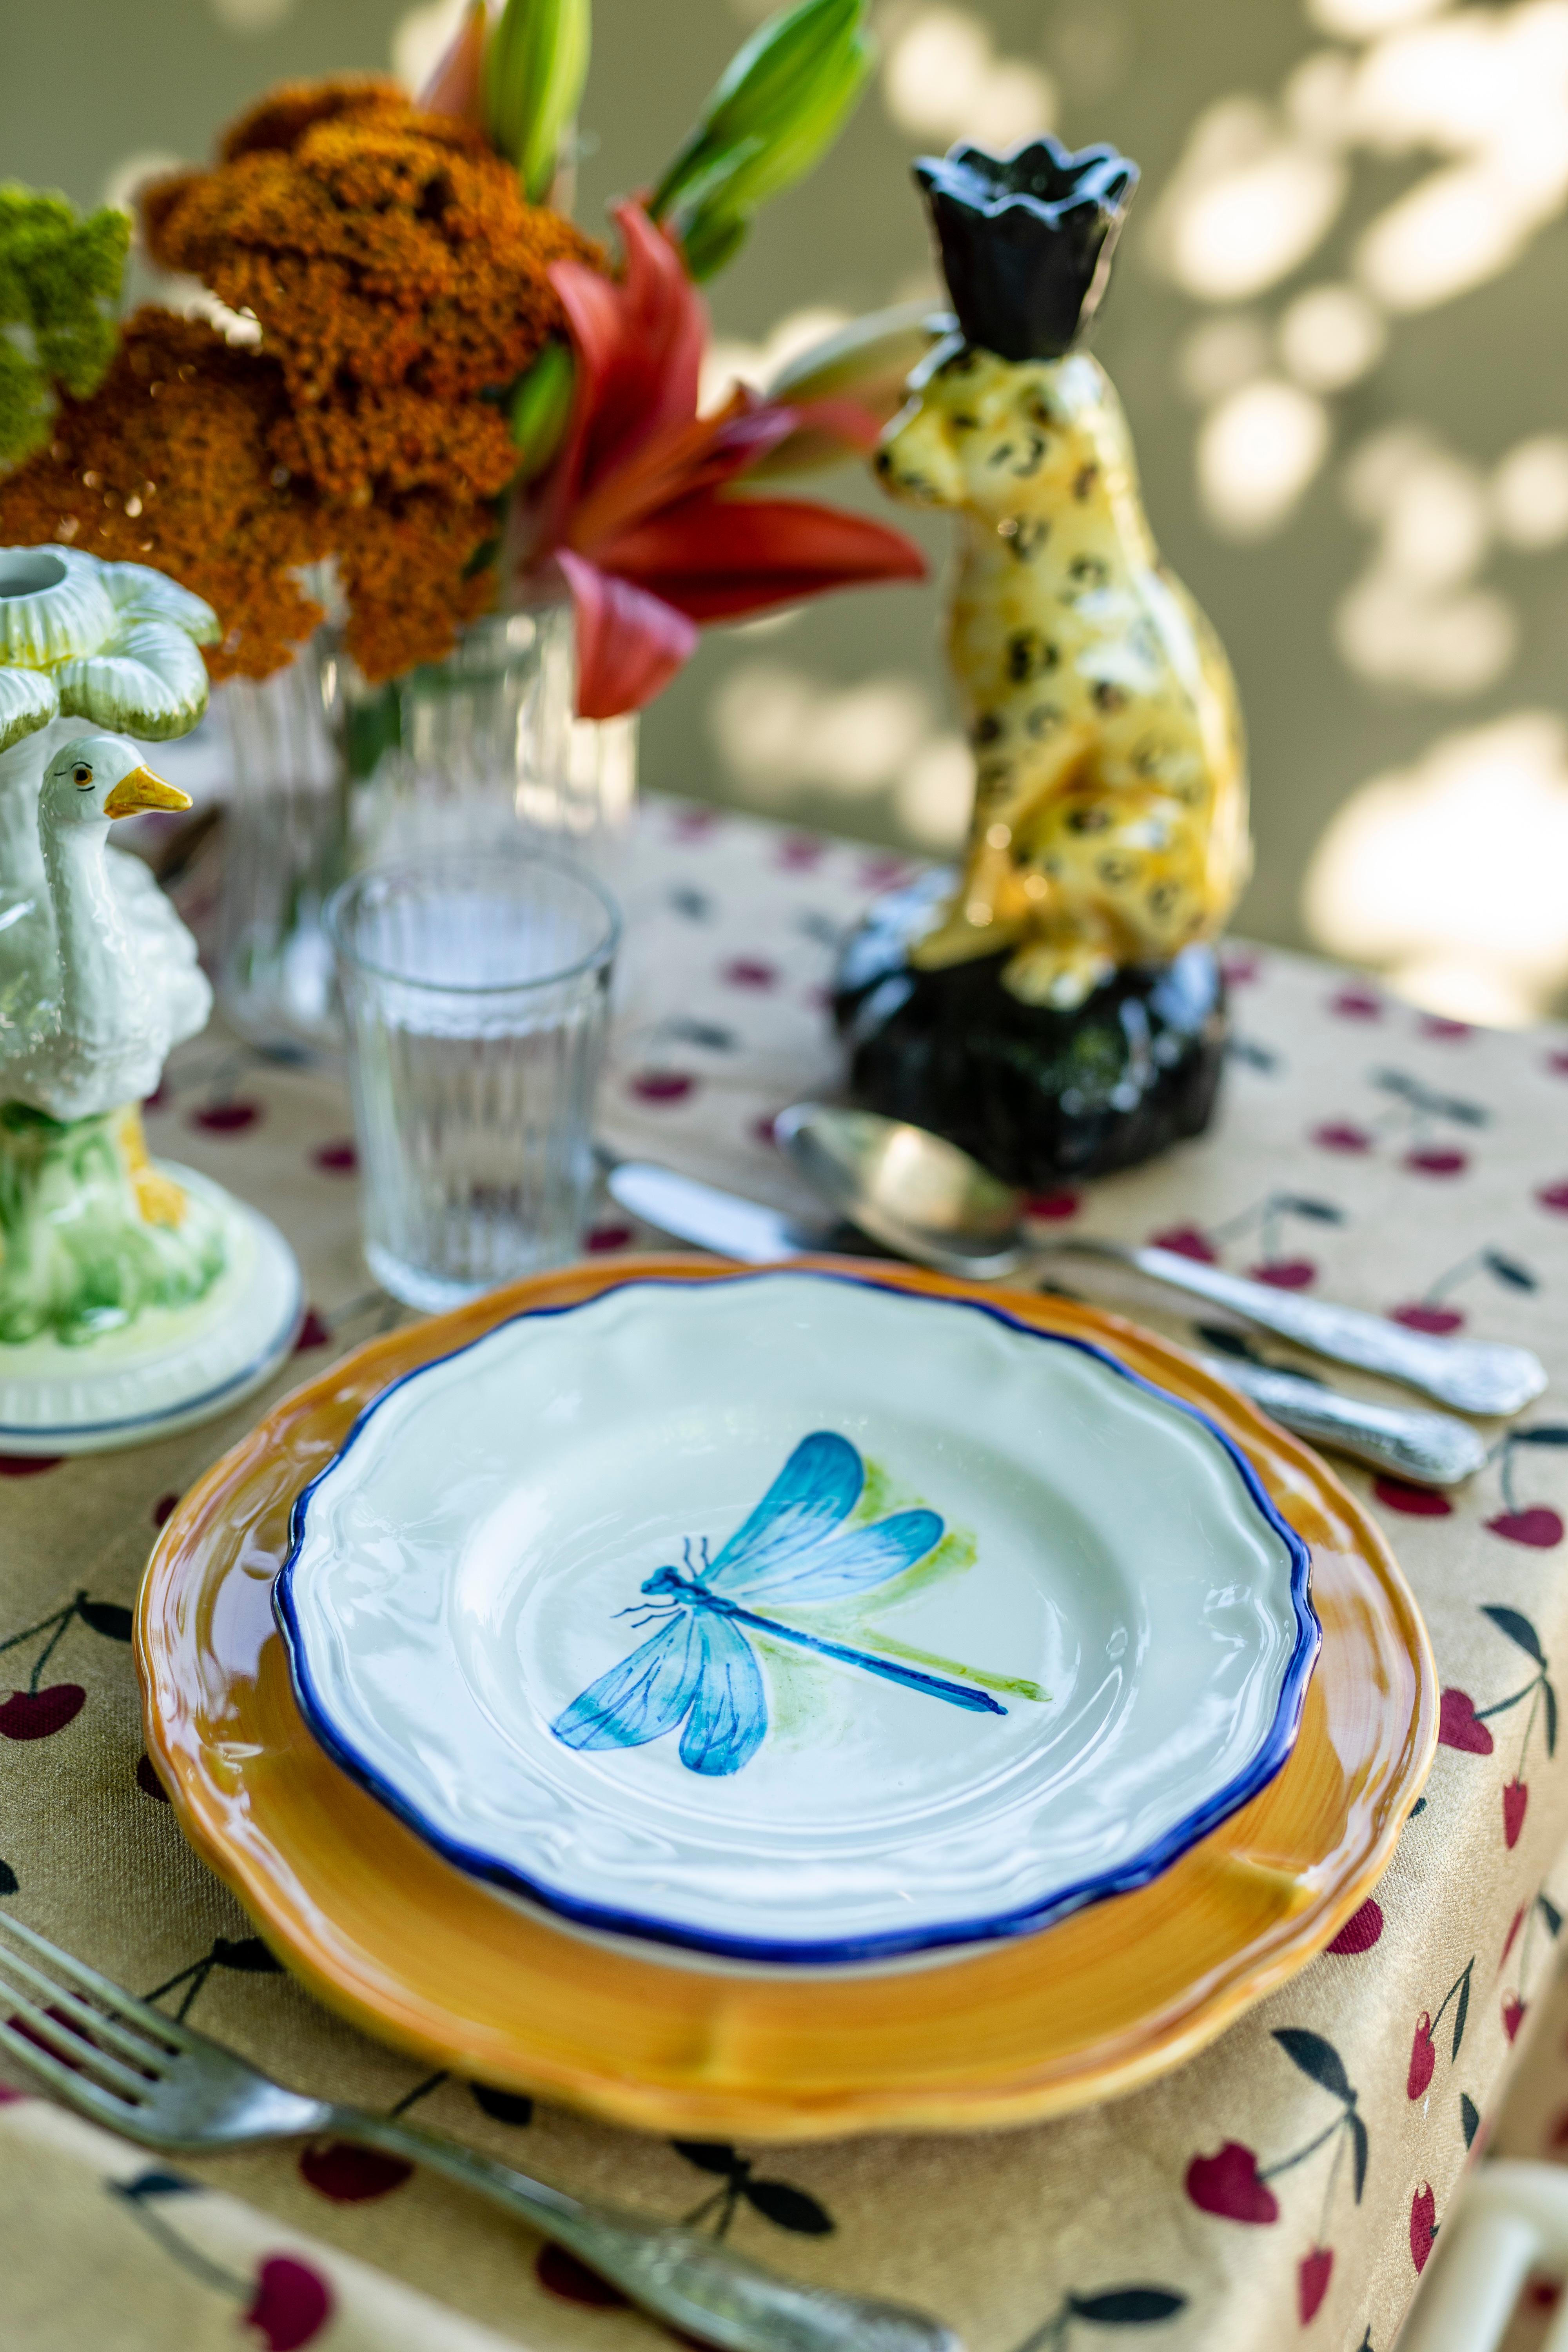 What is more colorful than a colorfulr insect?
Butterflies, dragonflies, beed and ladybugs will make your table sparkle.